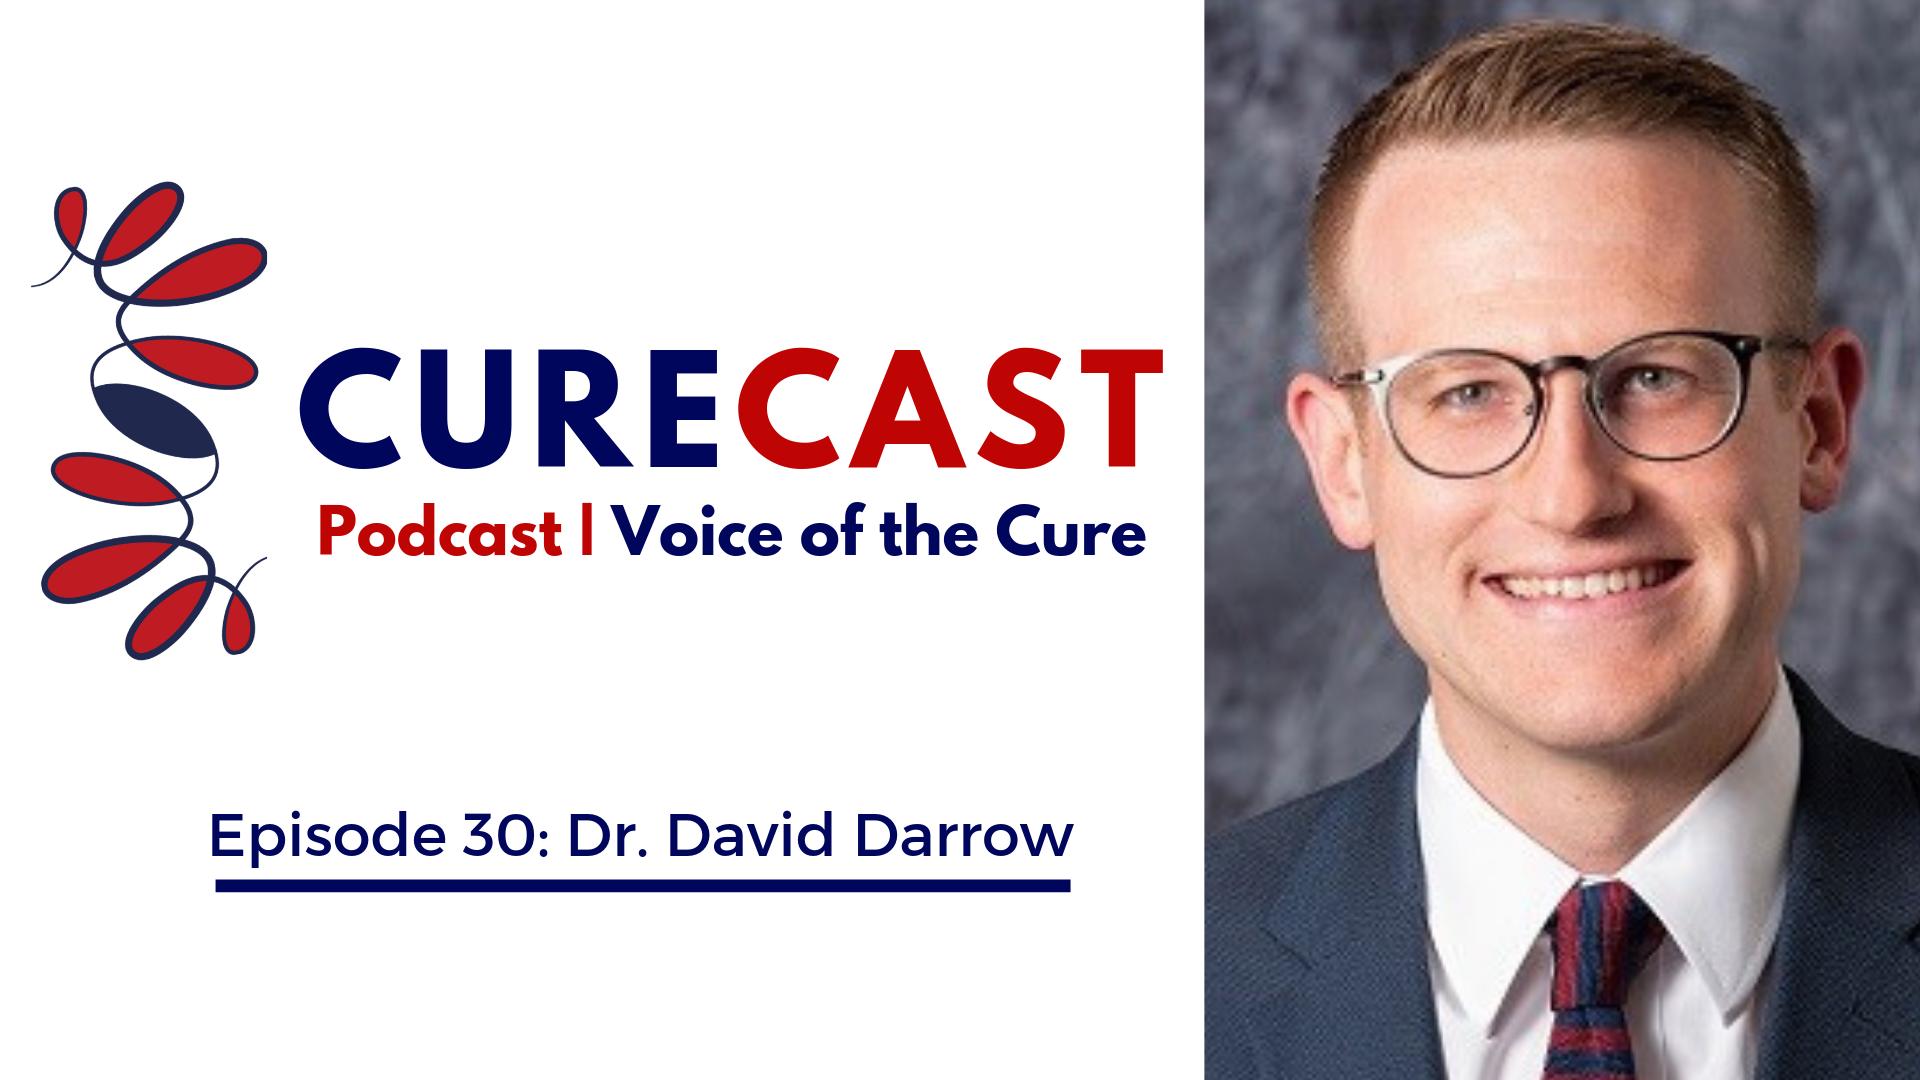 Dr. David Darrow on the Transformation of Suffering